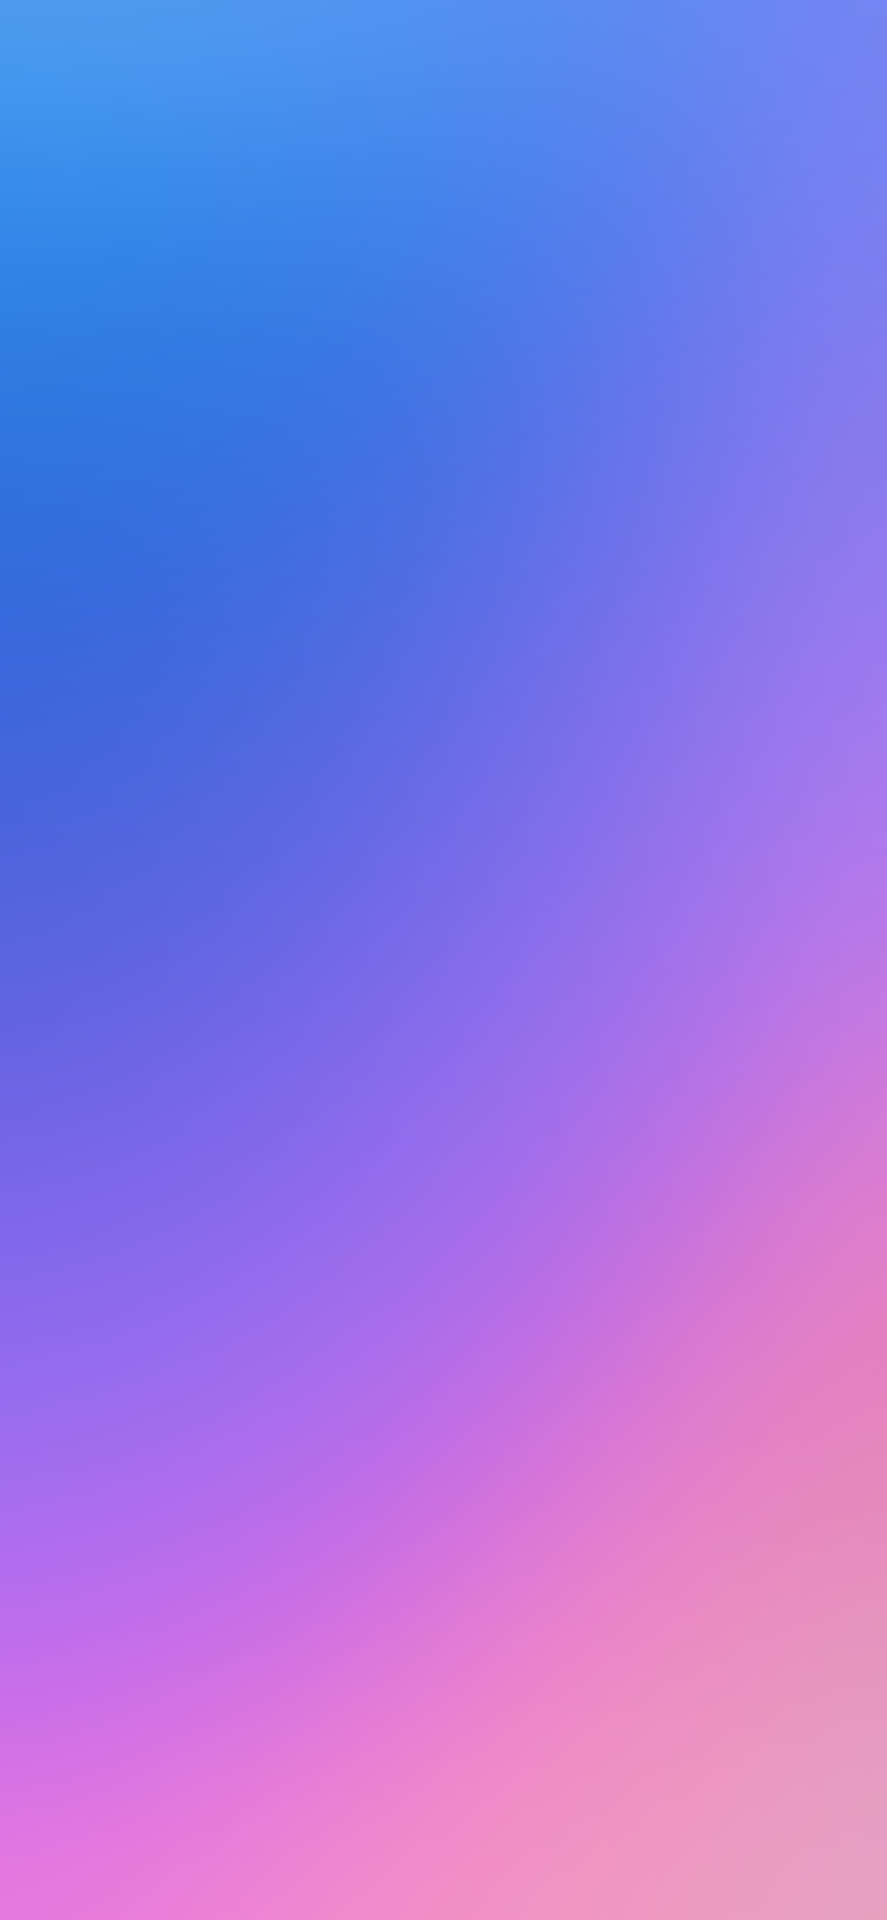 Show off your style with this vibrant Gradient iPhone. Wallpaper